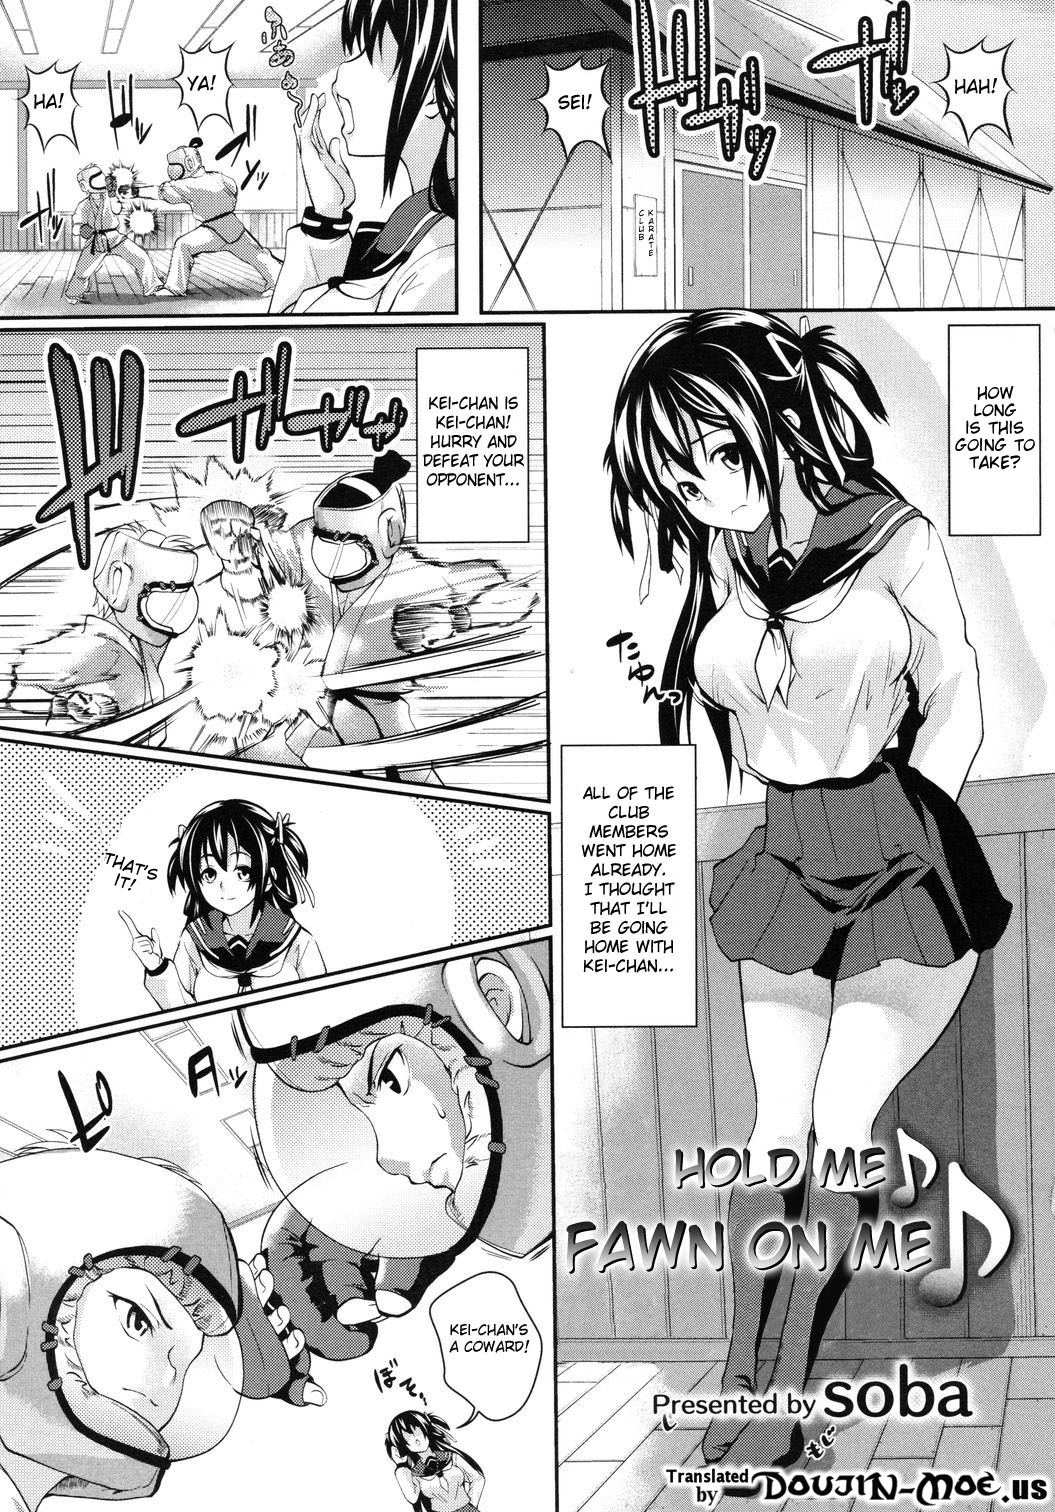 [soba] Tsukushite♪Amaete♪ | Hold Me, Fawn on Me Ch. 1-2 [English] {doujin-moe.us} page 1 full